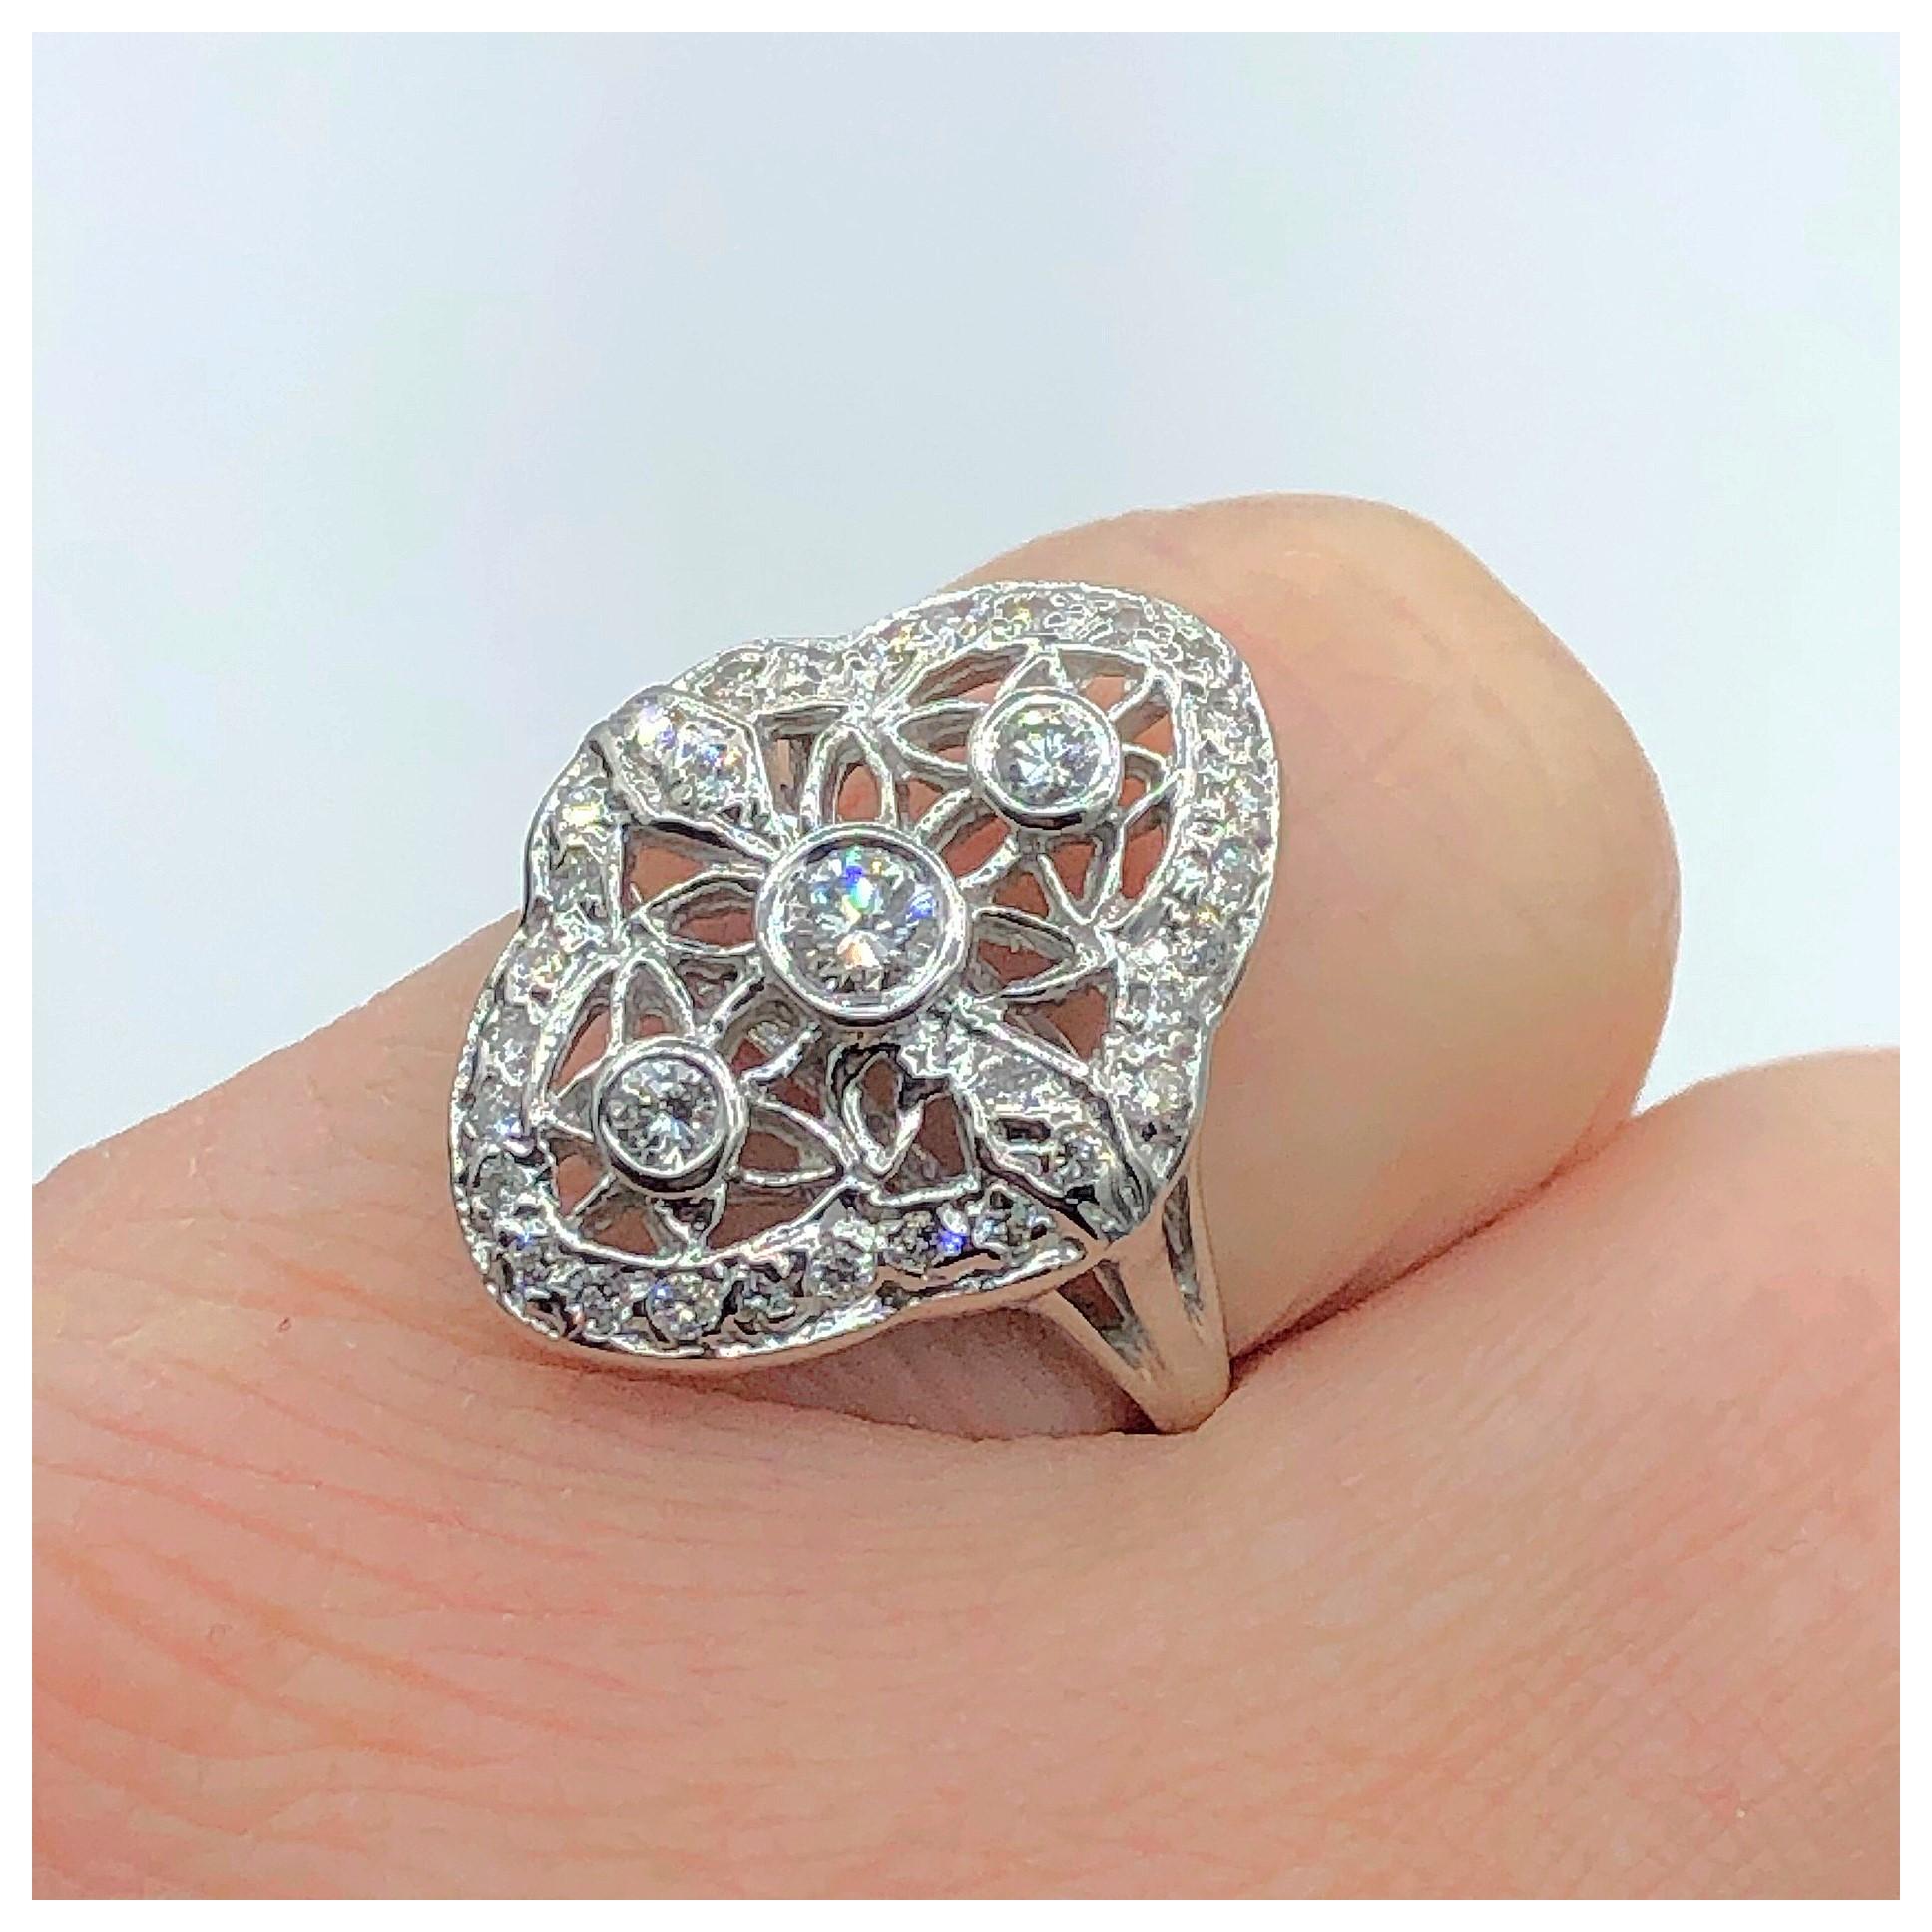 This beautiful antique reproduction in 14 Karat white gold contains .51 ct. of G color SI1 clarity diamonds. It measures approximately 20 x 16 millimeters. It is a finger size 6.5 but can easily be made to fit!
If you don't see something, say